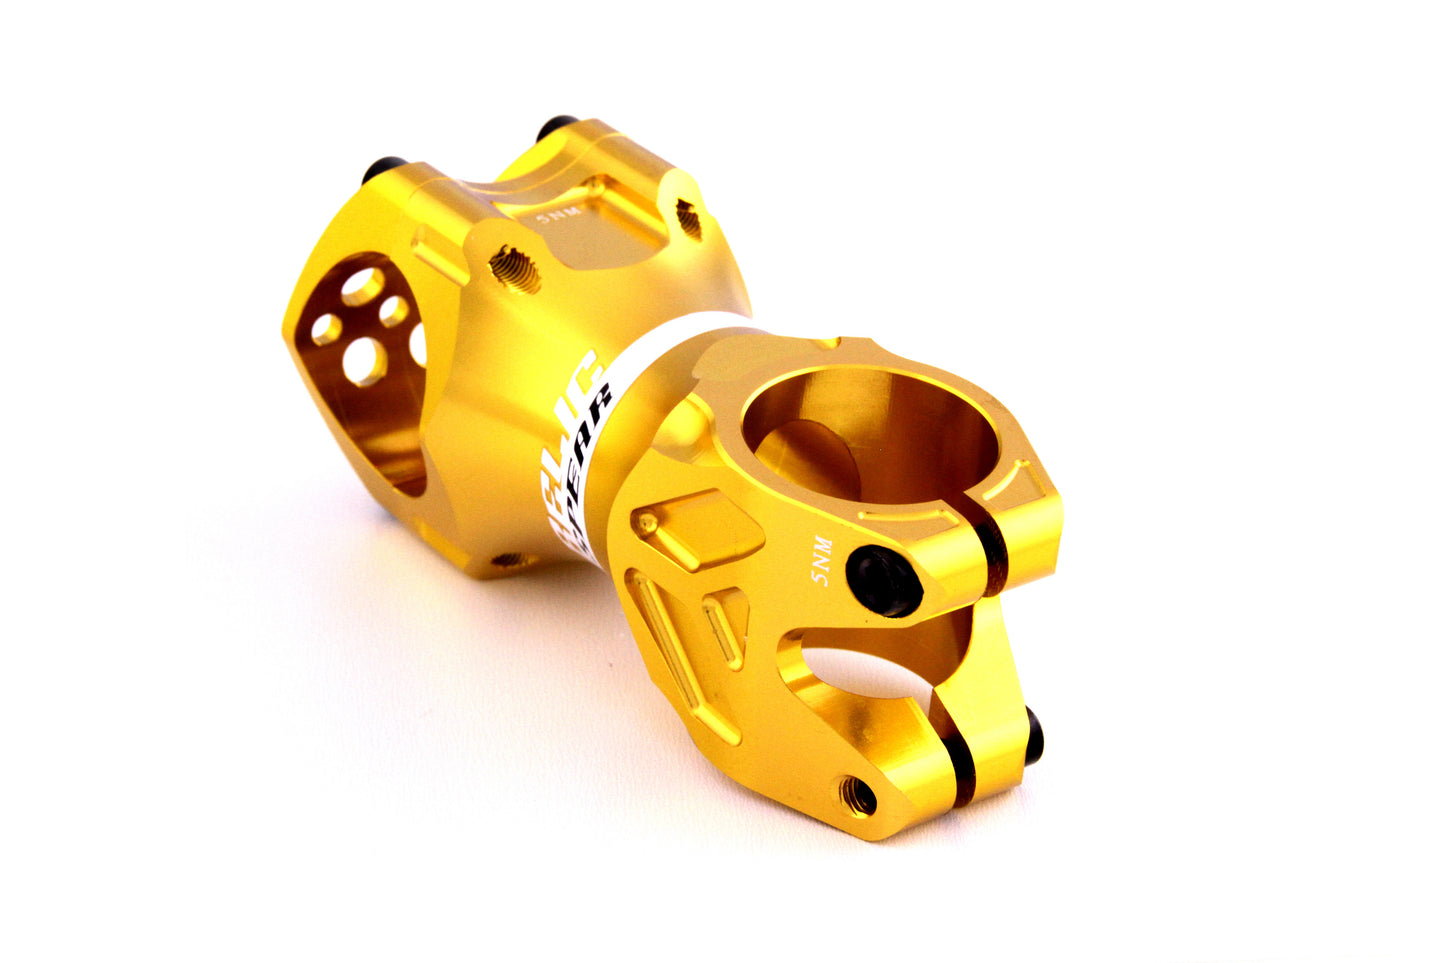 Relic Spear MTB Stem Forged Aluminum - 31.8mm bar bore - Ext. 90mm - Gold